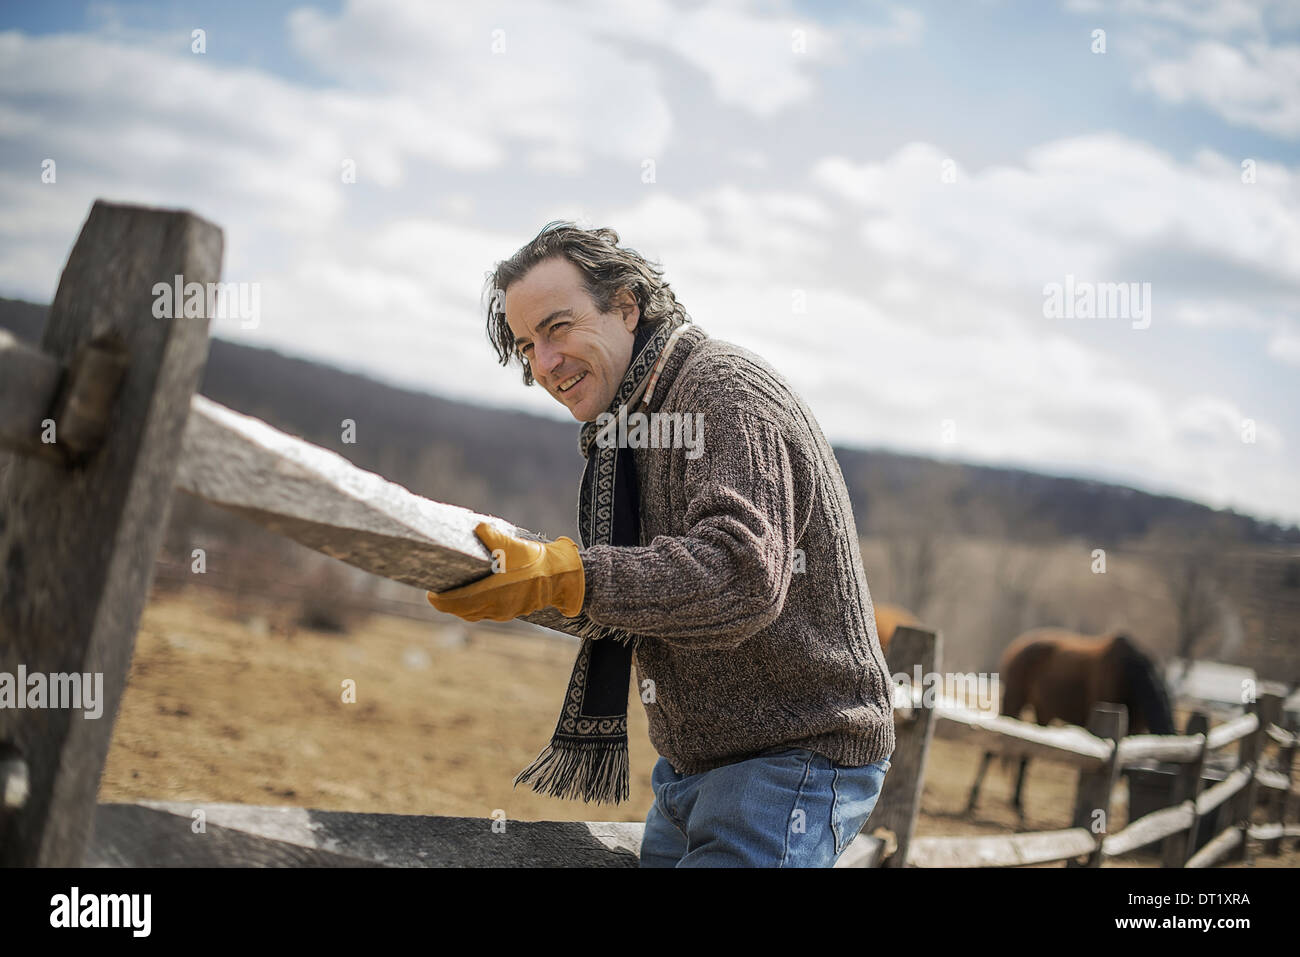 A man fixing a post and rail fence around a horse paddock Stock Photo